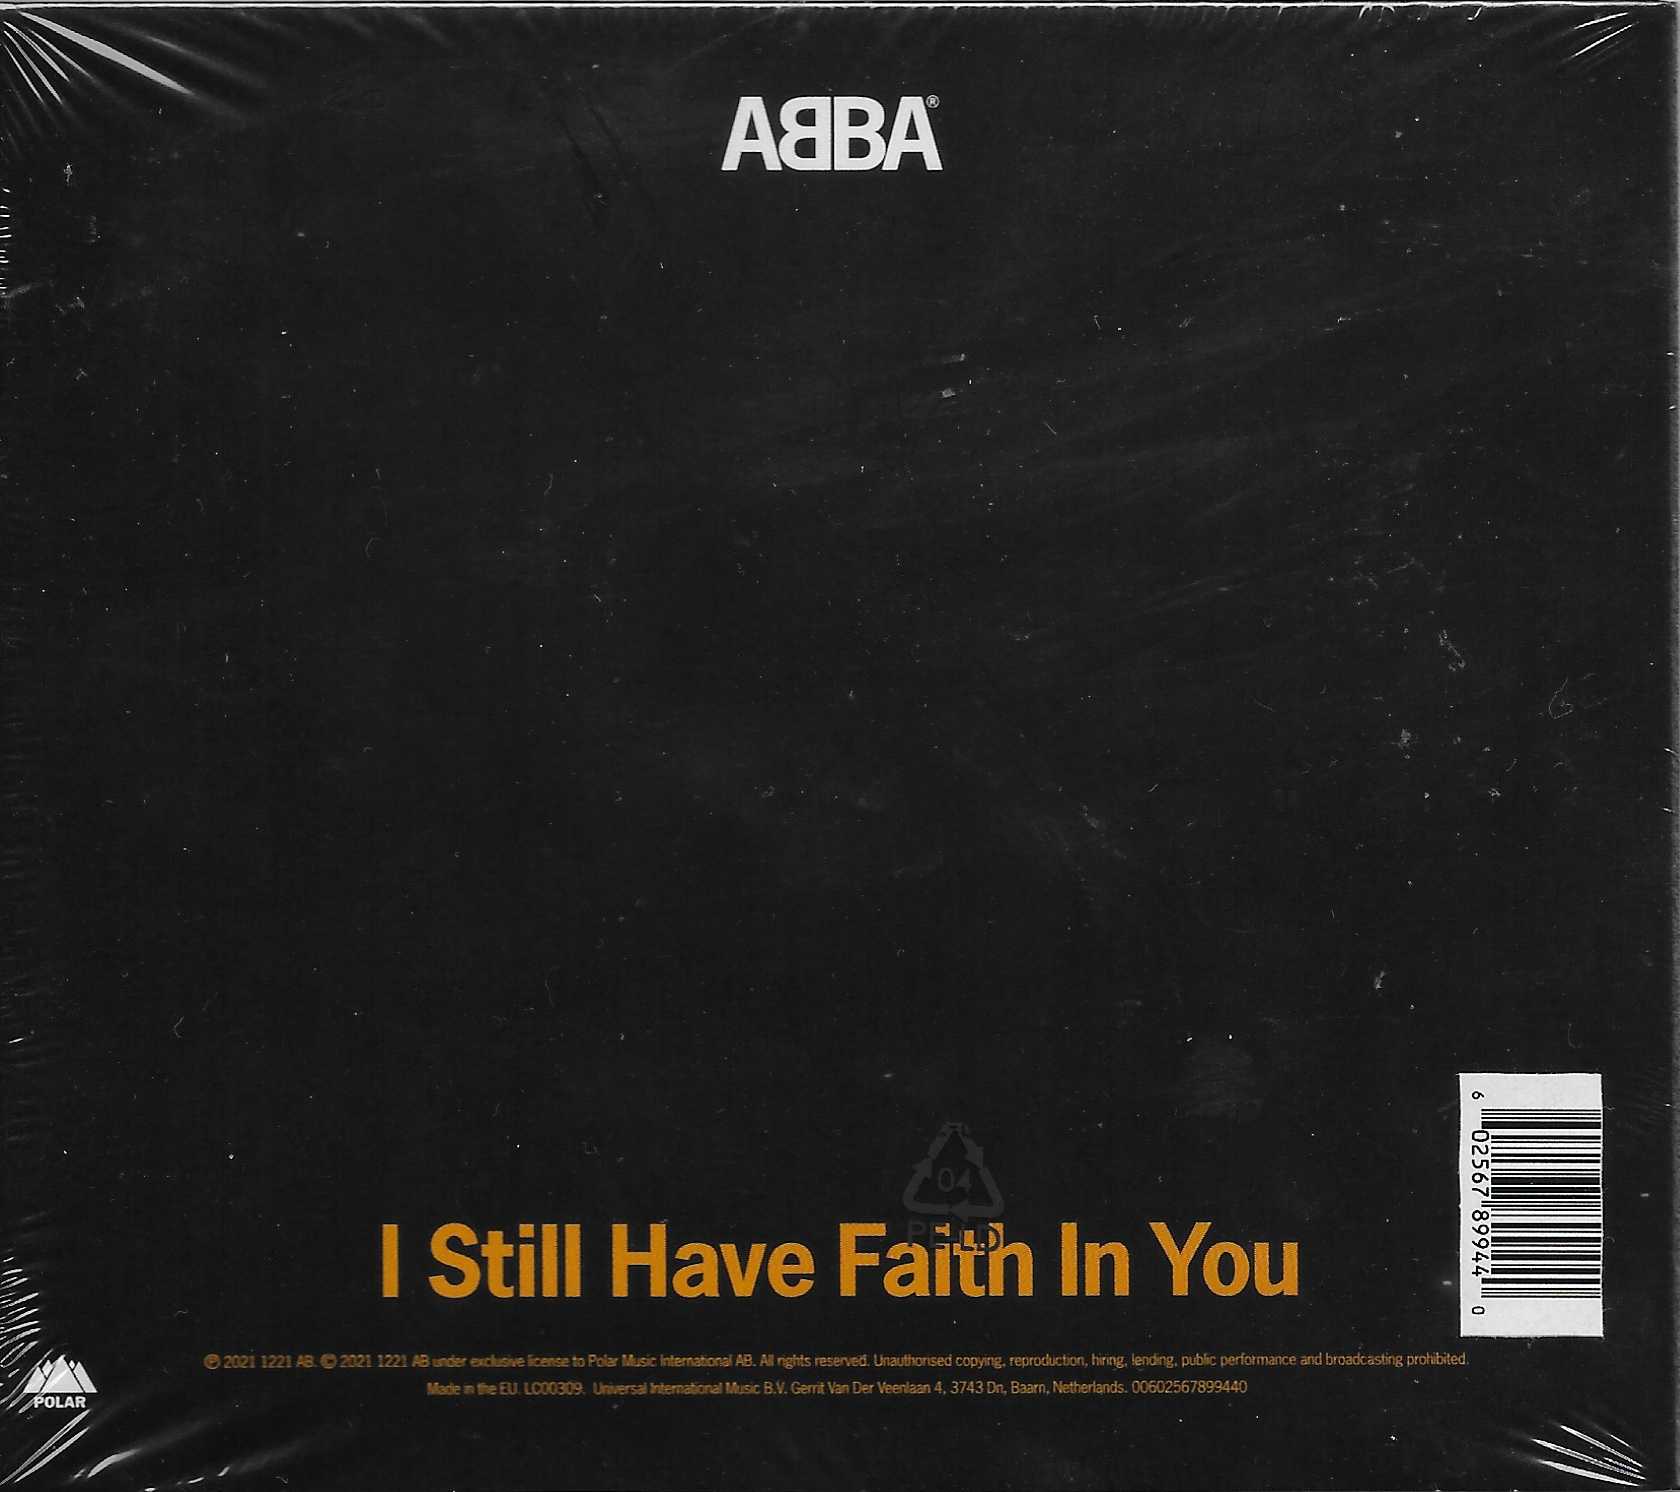 Picture of 00602567899440 I still have faith in you by artist Abba 